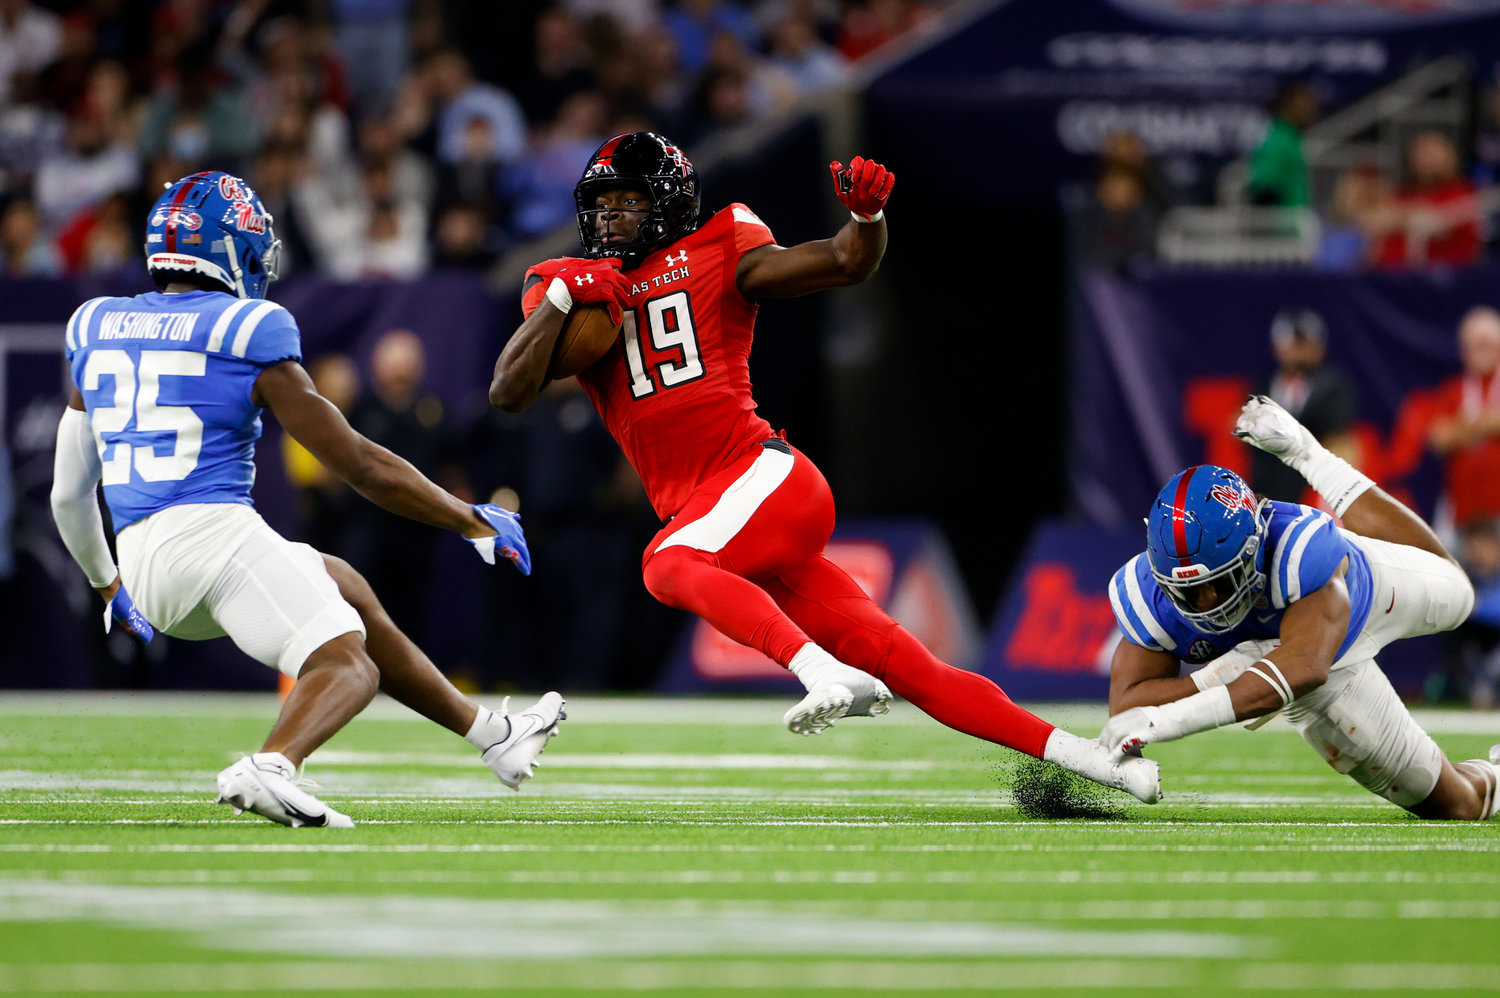 Texas Tech wide receiver Loic Fouonji (19) carries the ball after a catch and escapes the grasp of an Ole Miss defender during the TaxAct Texas Bowl on Dec. 28, 2022 in Houston.